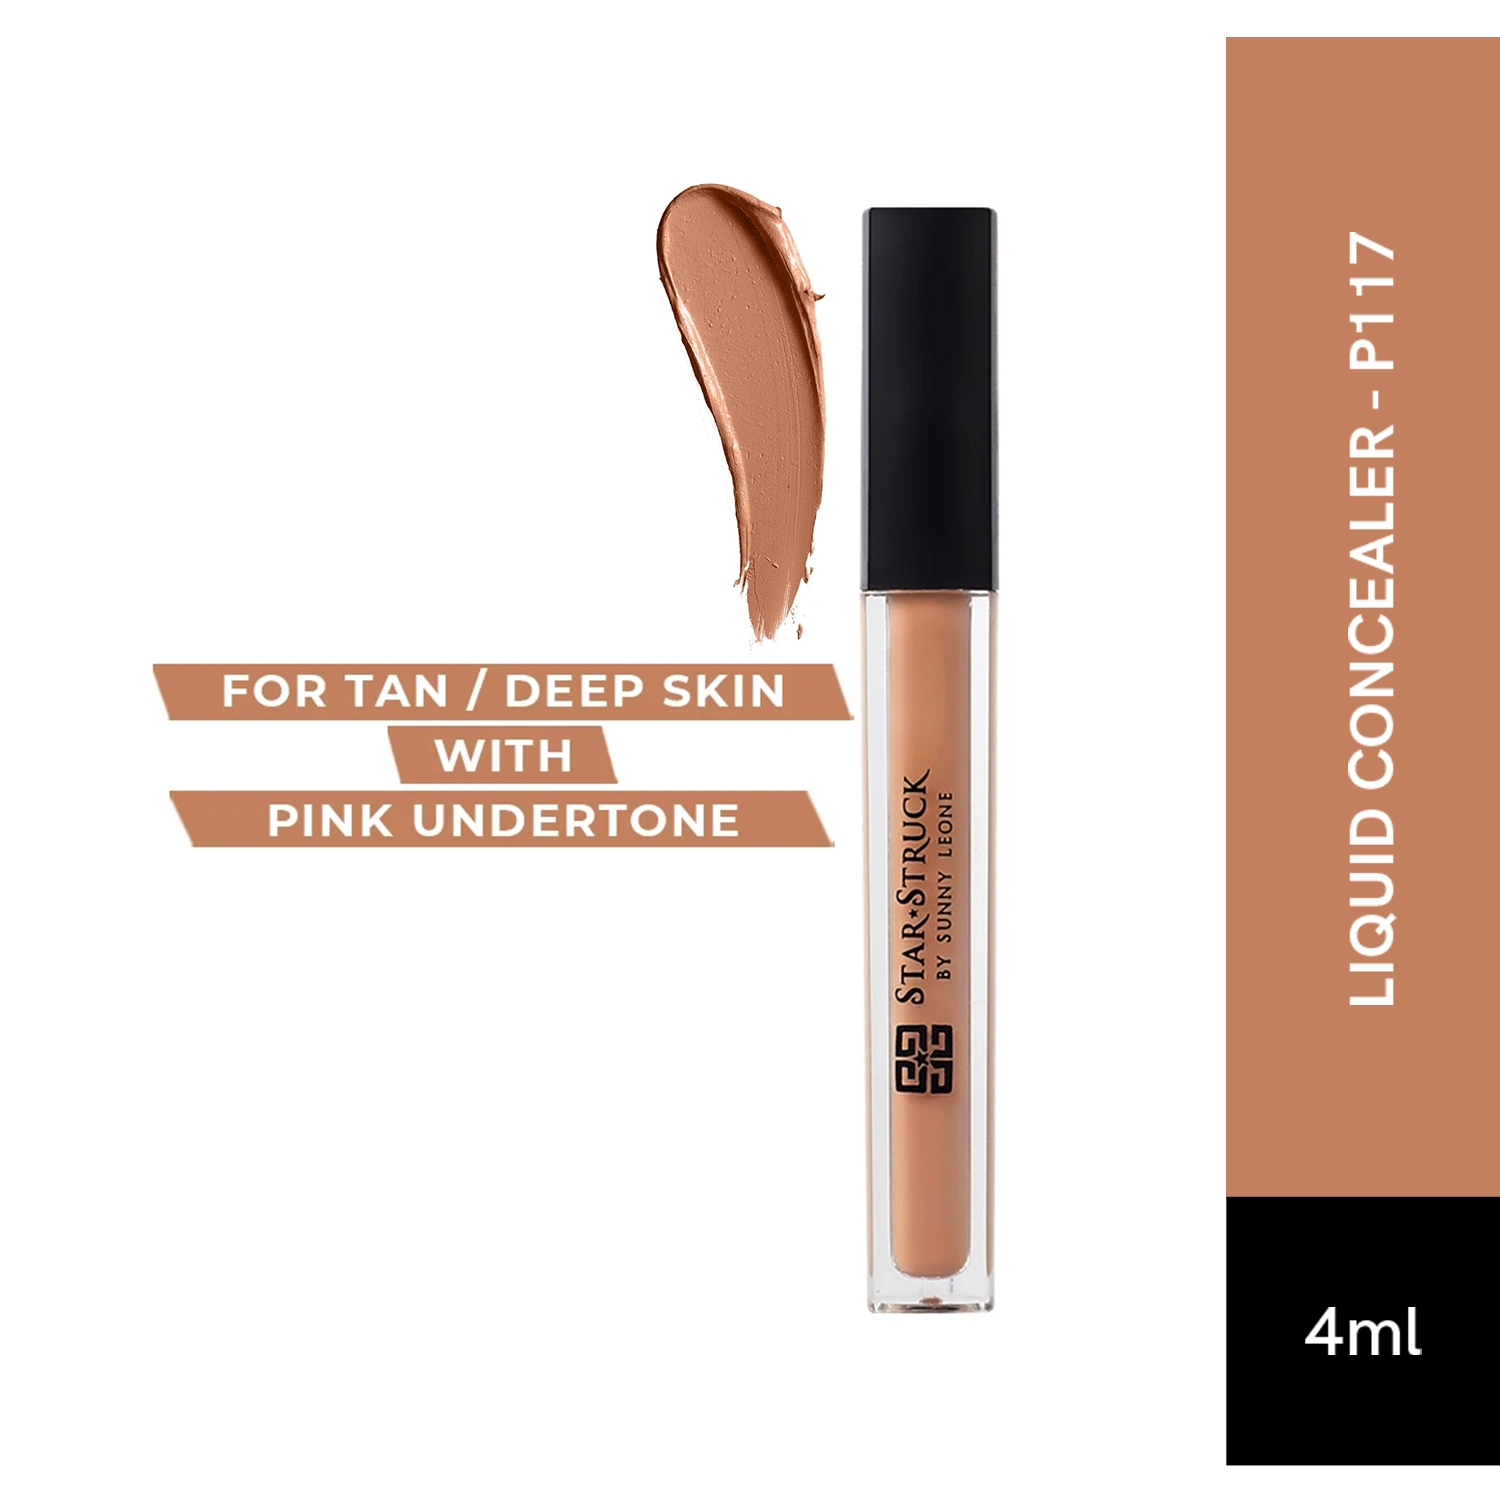 Star Struck by Sunny Leone | Star Struck by Sunny Leone Liquid Concealer - P117 (4ml)